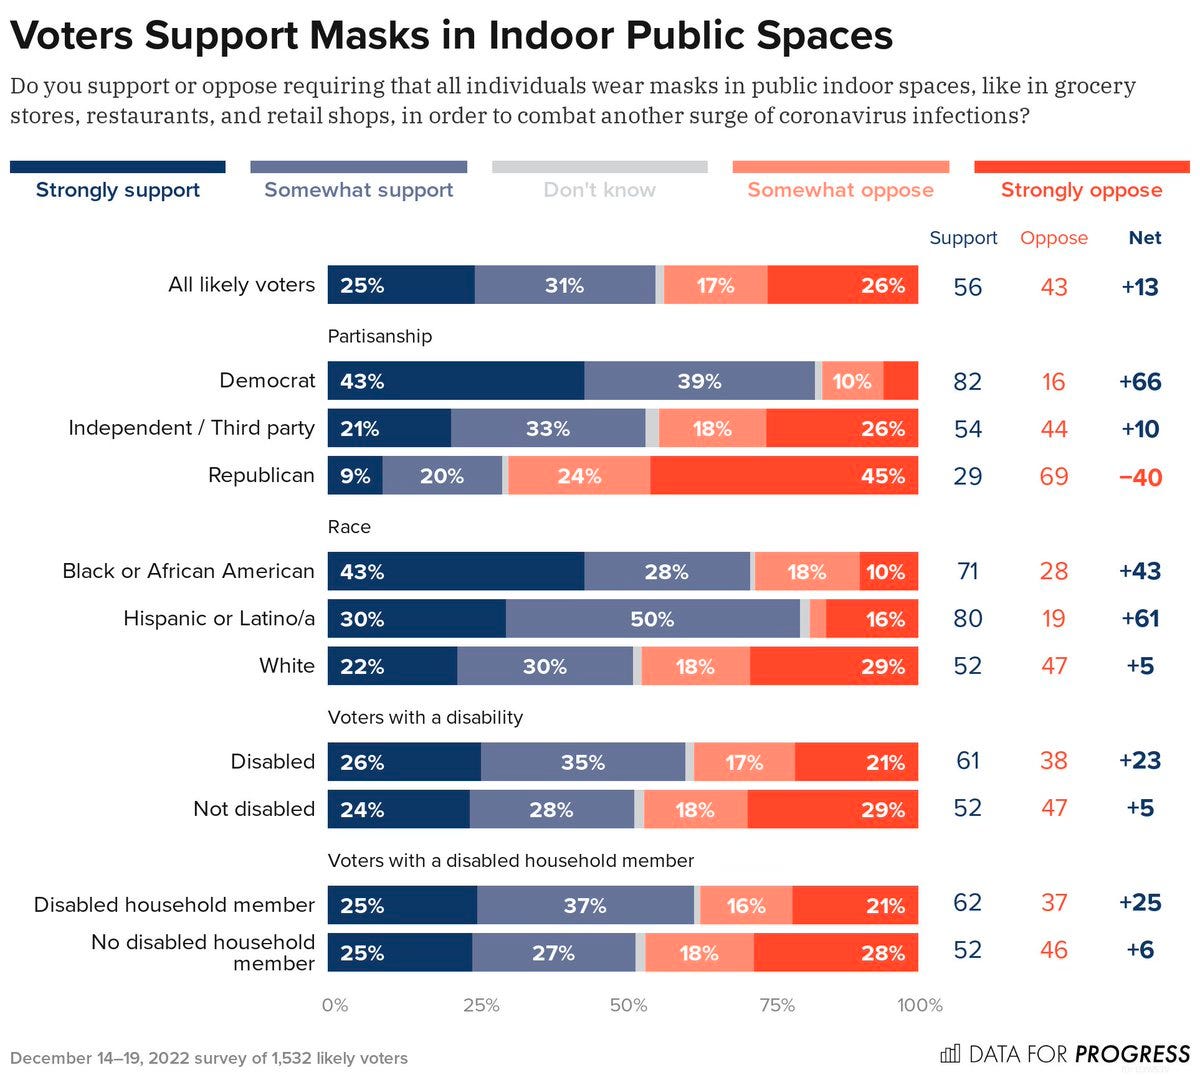 Bar chart of polling data from Data For Progress. Title: Voters Support Masks in Indoor Public Spaces. Description: Do you support or oppose requiring that all individuals wear masks in public indoor spaces, like in grocery stores, restaurants, and retail shops, in order to combat another surge of coronavirus infections? All likely voters — Support: 55%, Oppose: 43% Democrat — Support: 83%, Oppose: 16% Independent / Third party — Support: 54%, Oppose: 44% Republican — Support: 29%, Oppose: 69% Black or African American — Support: 71%, Oppose: 28% Hispanic or Latino/a — Support: 80%, Oppose: 18% White — Support: 52%, Oppose: 47% Disabled — Support: 61%, Oppose: 38% Not disabled — Support: 52%, Oppose: 47% Disabled household member — Support: 62%, Oppose: 37% No disabled household member — Support: 52%, Oppose: 46%  December 14–19, 2022 survey of 1,532 likely voters.